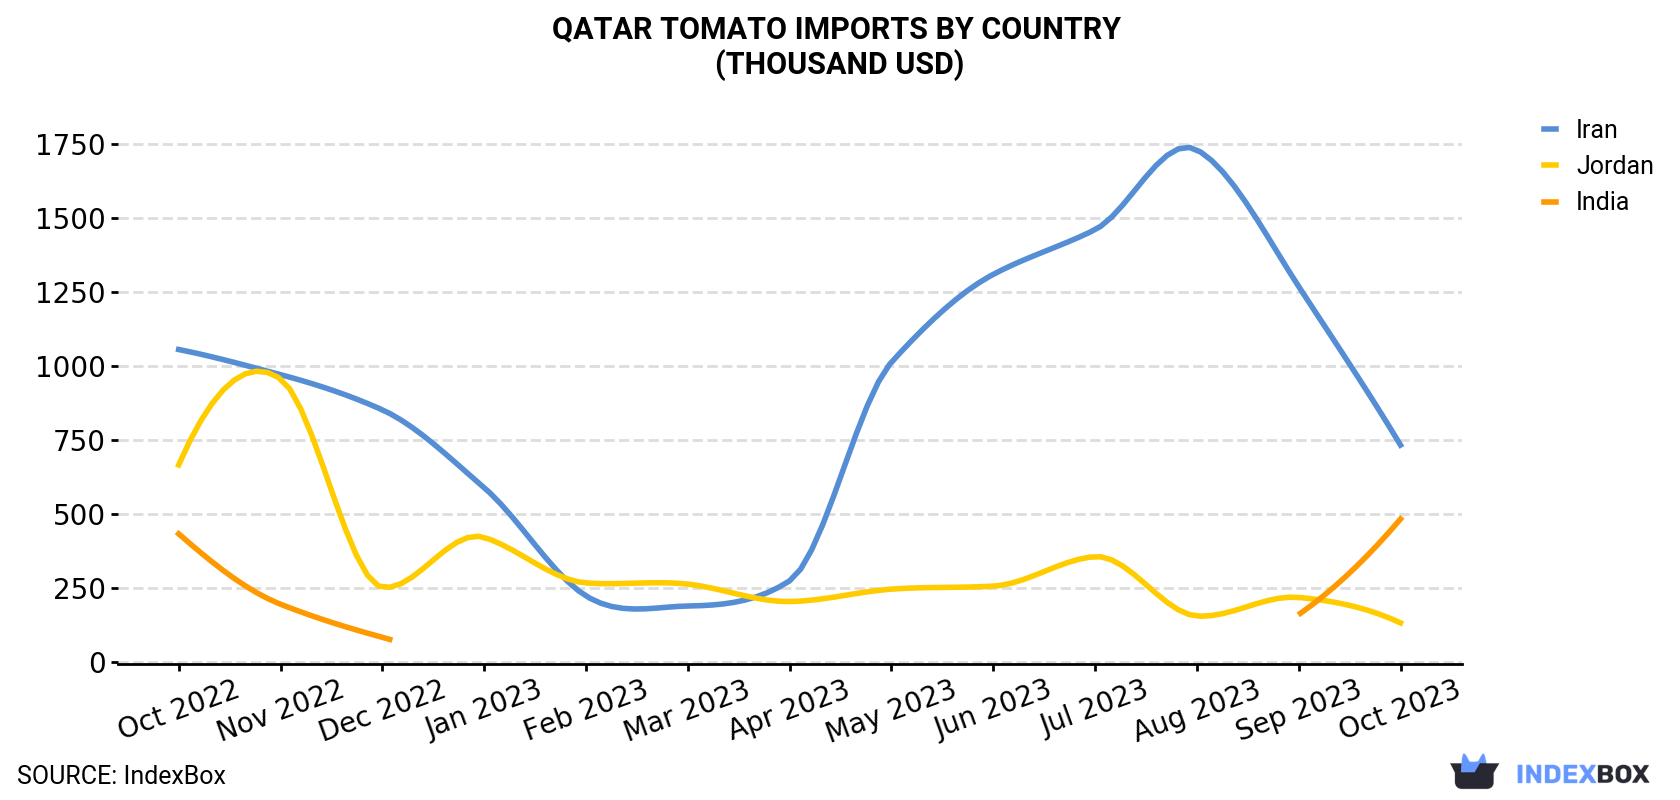 Qatar Tomato Imports By Country (Thousand USD)